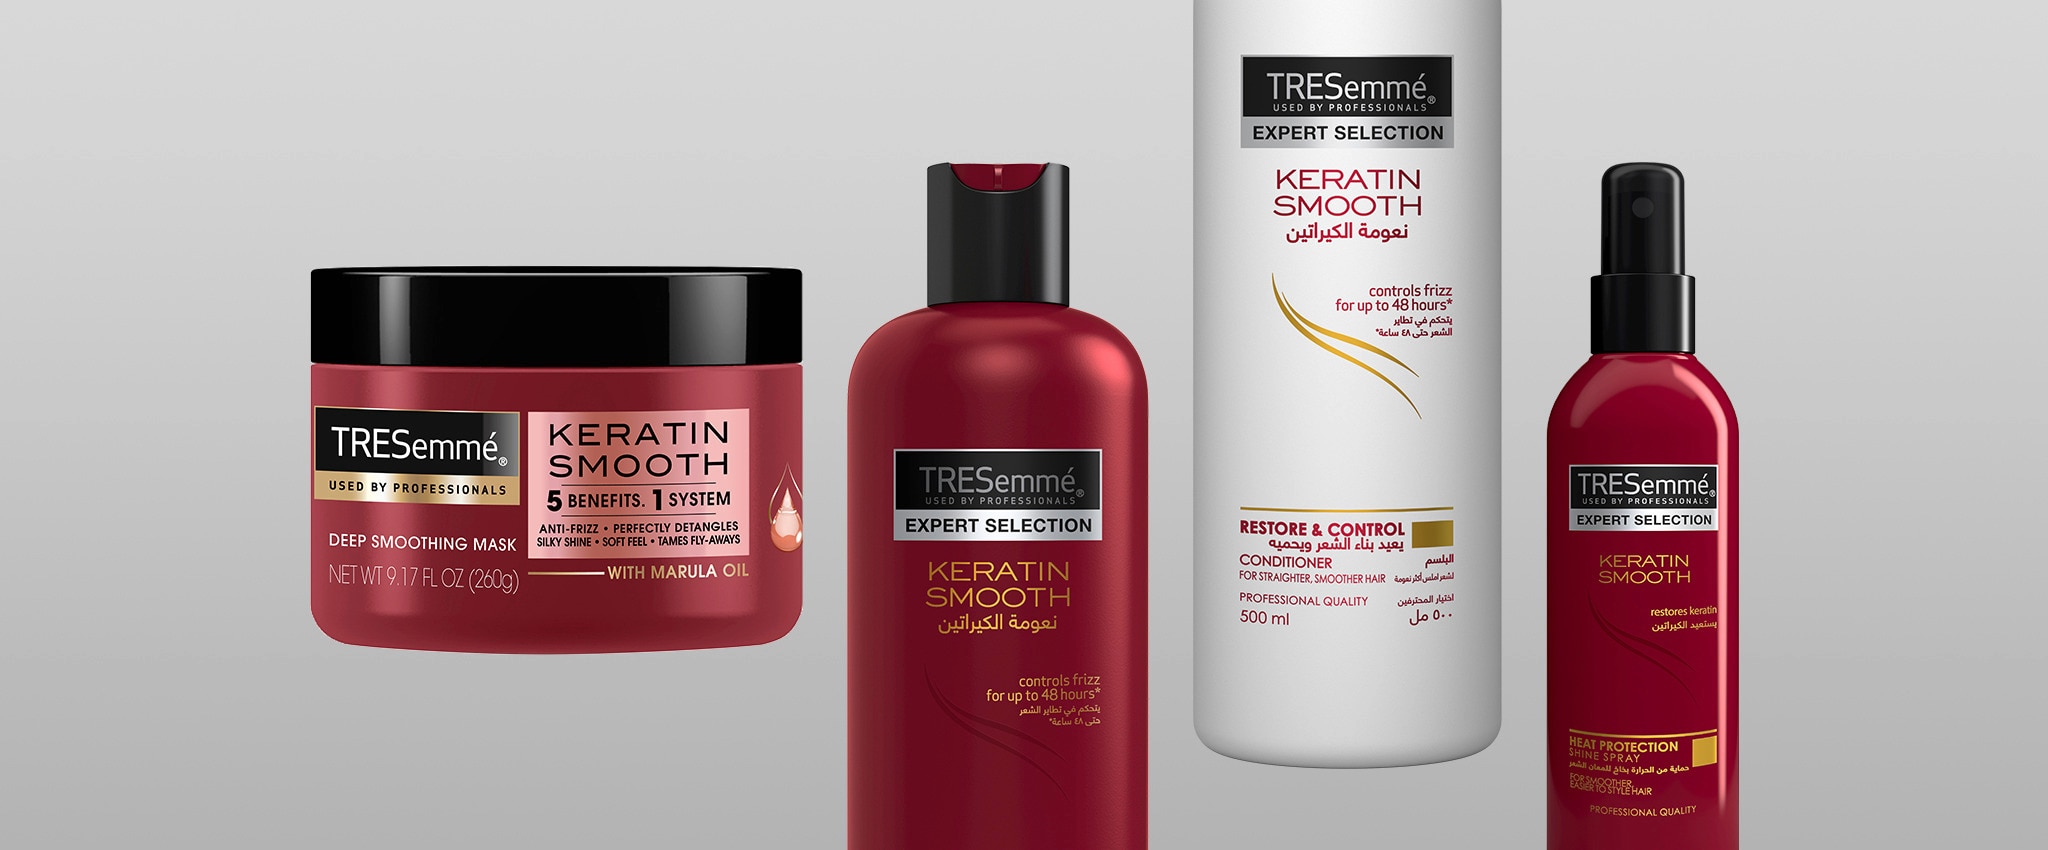 Product shot for TRESemmé Keratin Smooth collection